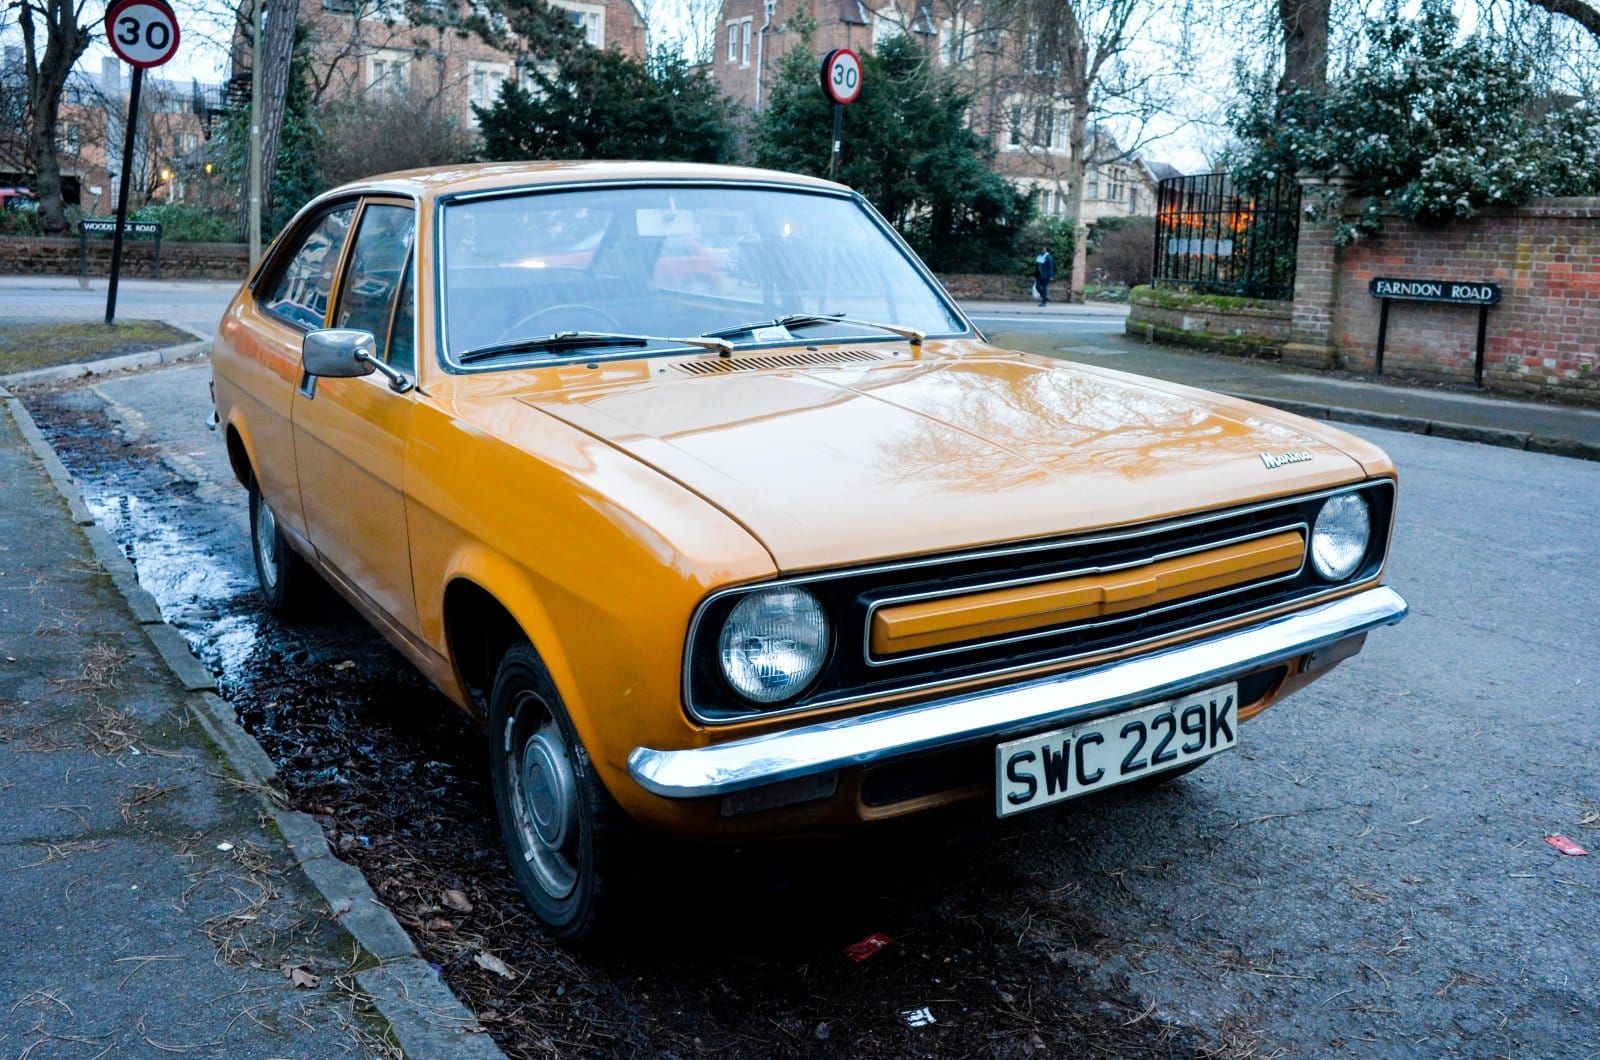 Image Credit: Shutterstock / John Selway <p>Not so much driving on the road as it was drifting between breakdowns, the Morris Marina was a masterclass in automotive unpredictability.</p>